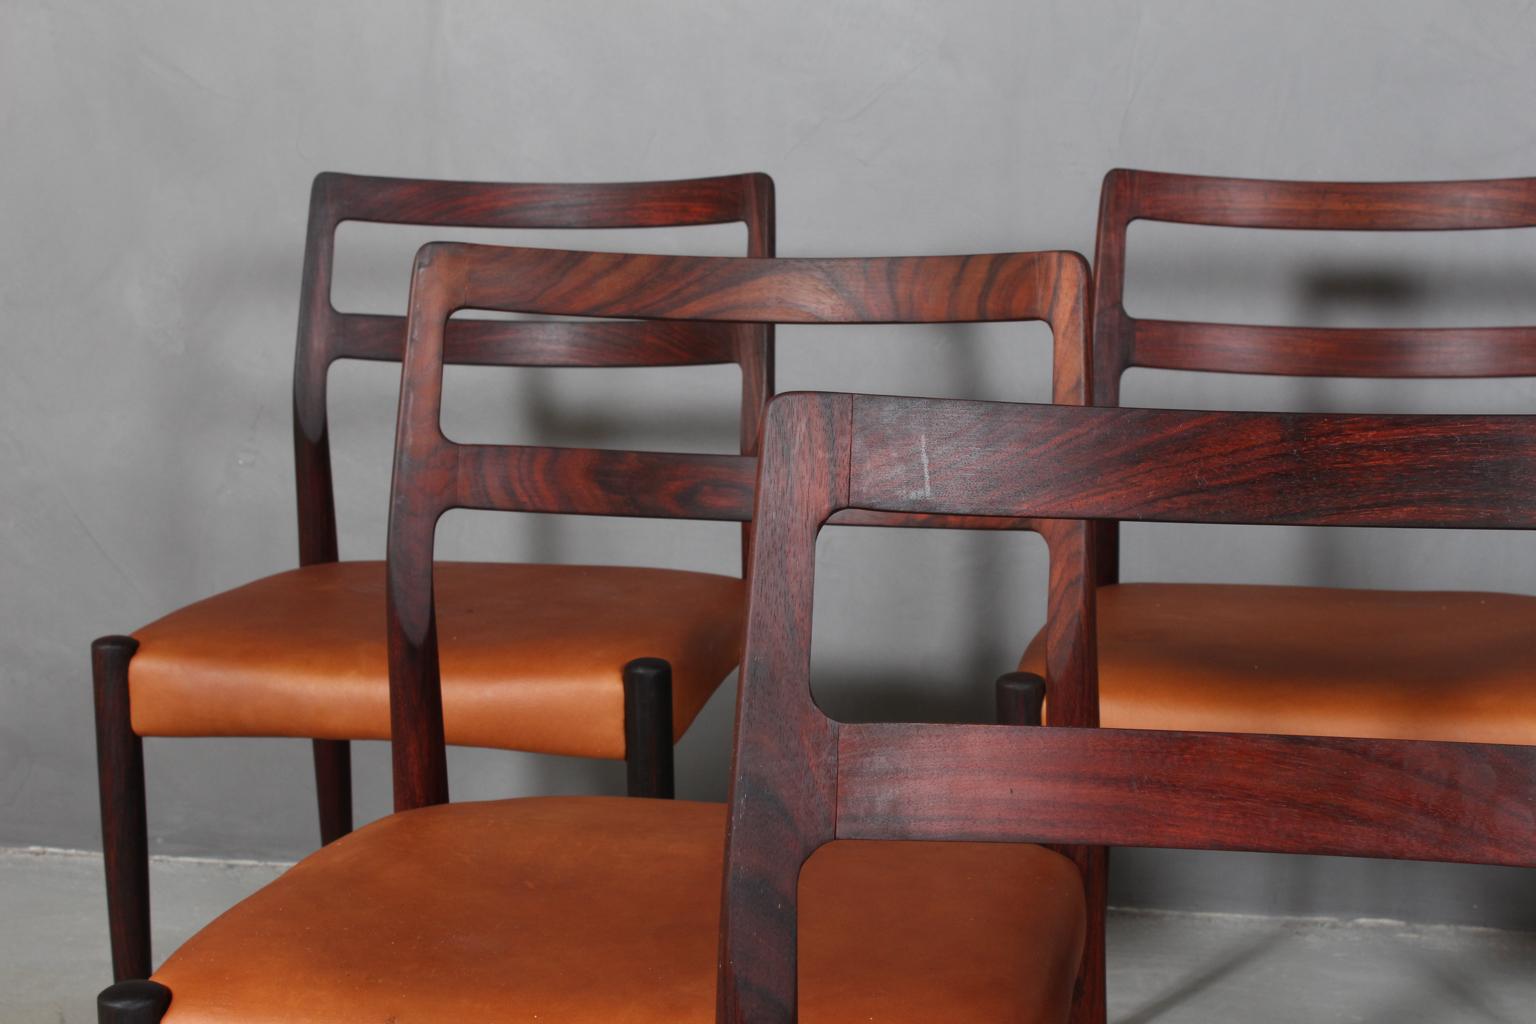 Scandinavian Modern Johannes Andersen Six Dining Chairs, Model Anna, Rosewood and Leather Upholstery